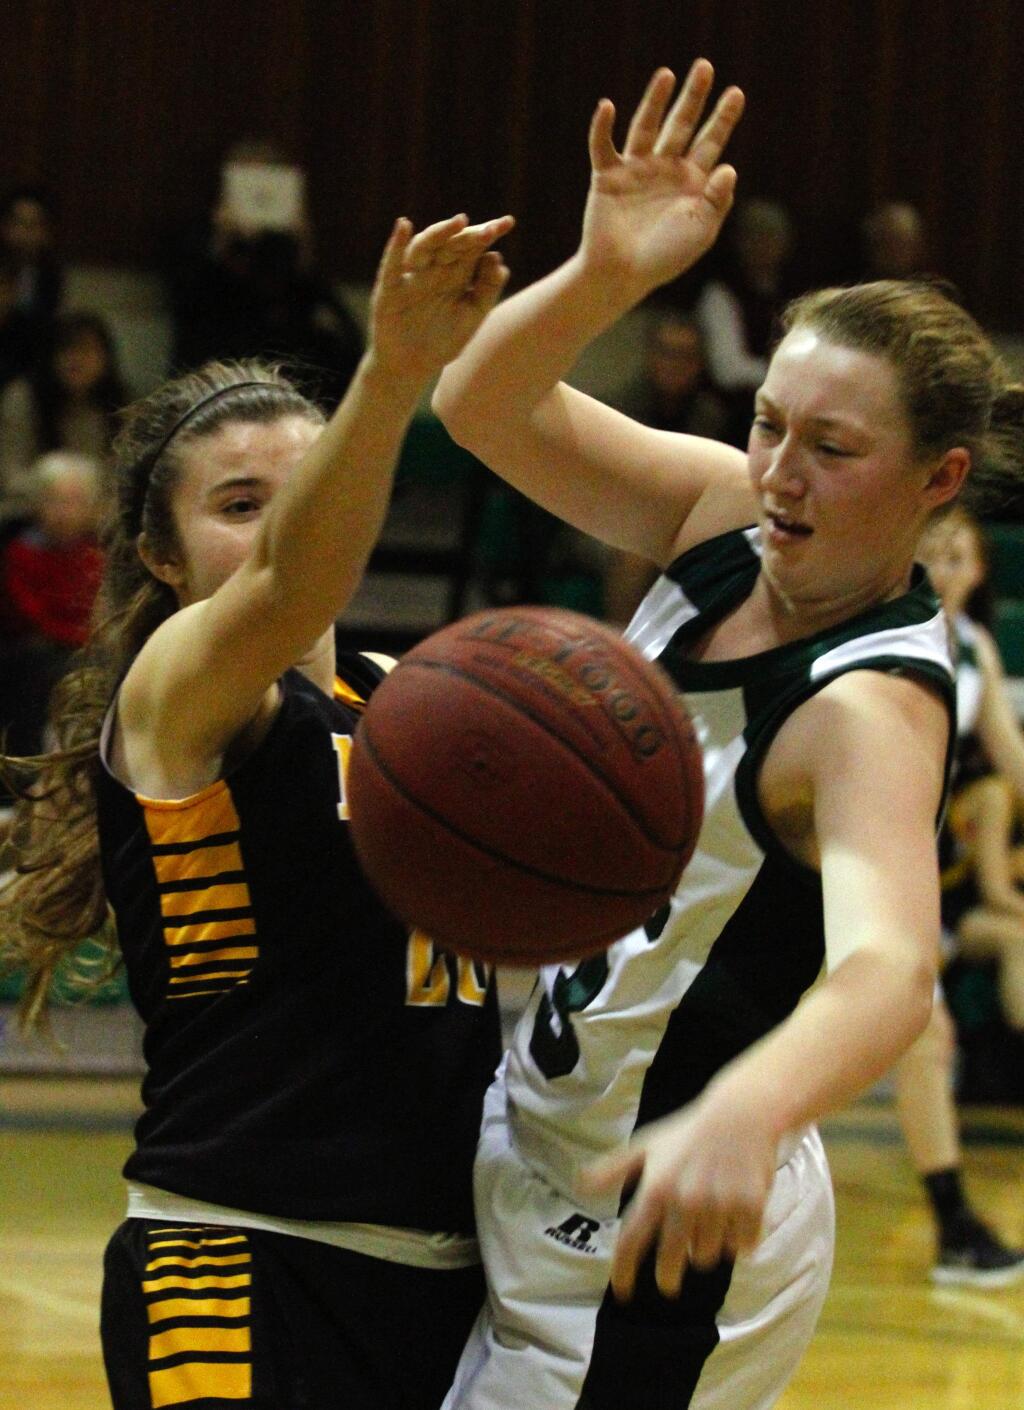 Bill Hoban/Index-TribuneSenior Shelby Camilleri (right) battles for the ball during the Lady Dragons' nonleague victory over Novato Tuesday night in Pfeiffer Gym.